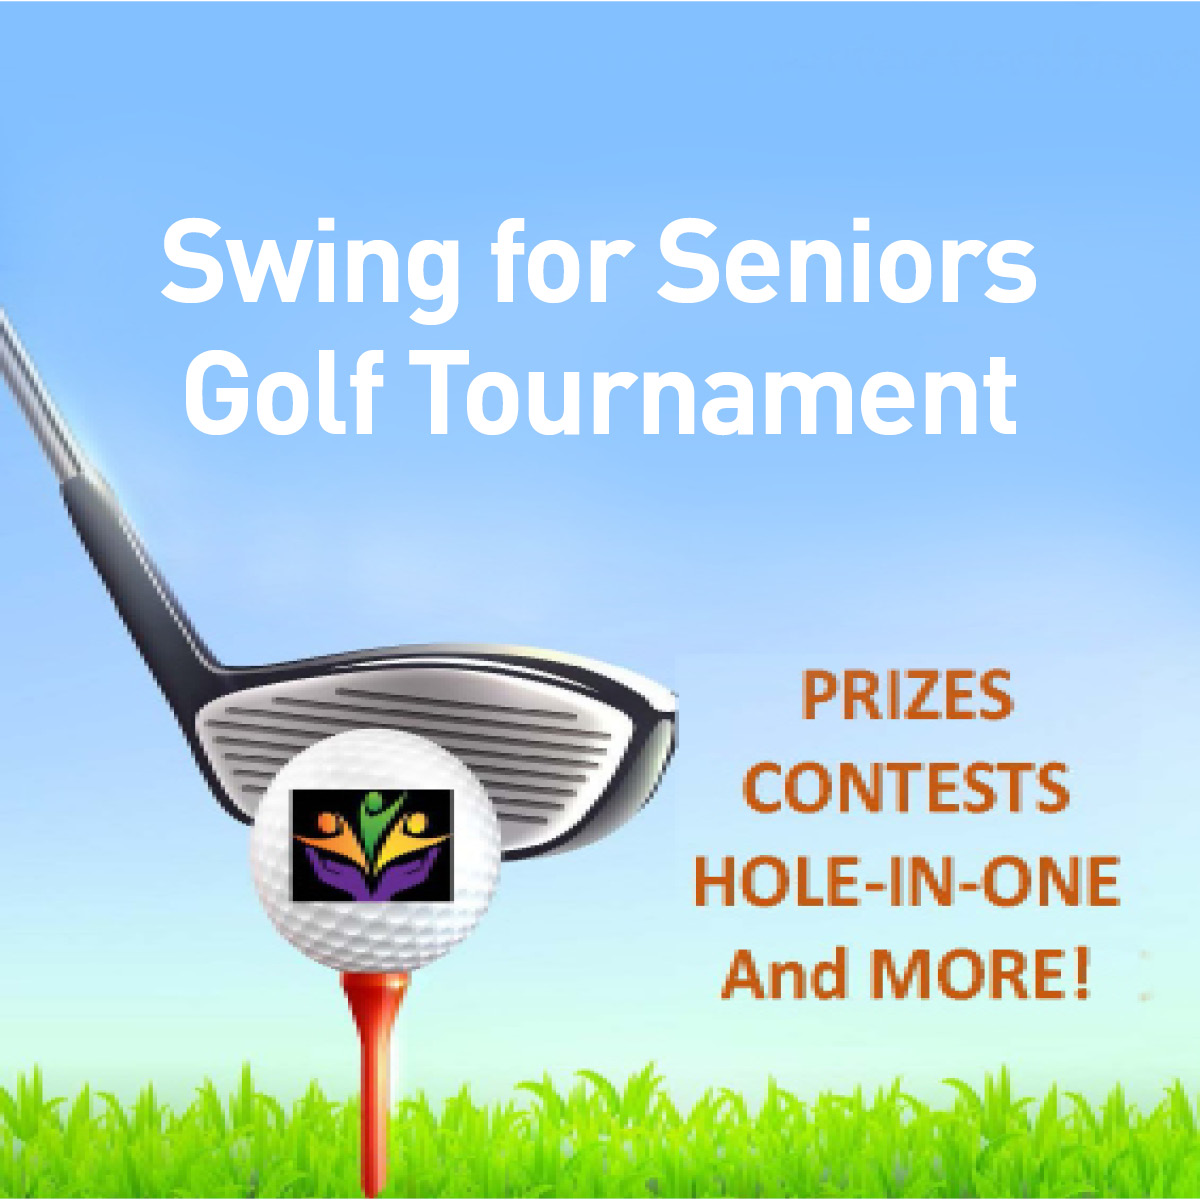 logo for the Swing for Seniors Golf Tournament with prizes, contests, hole-in-one and more!